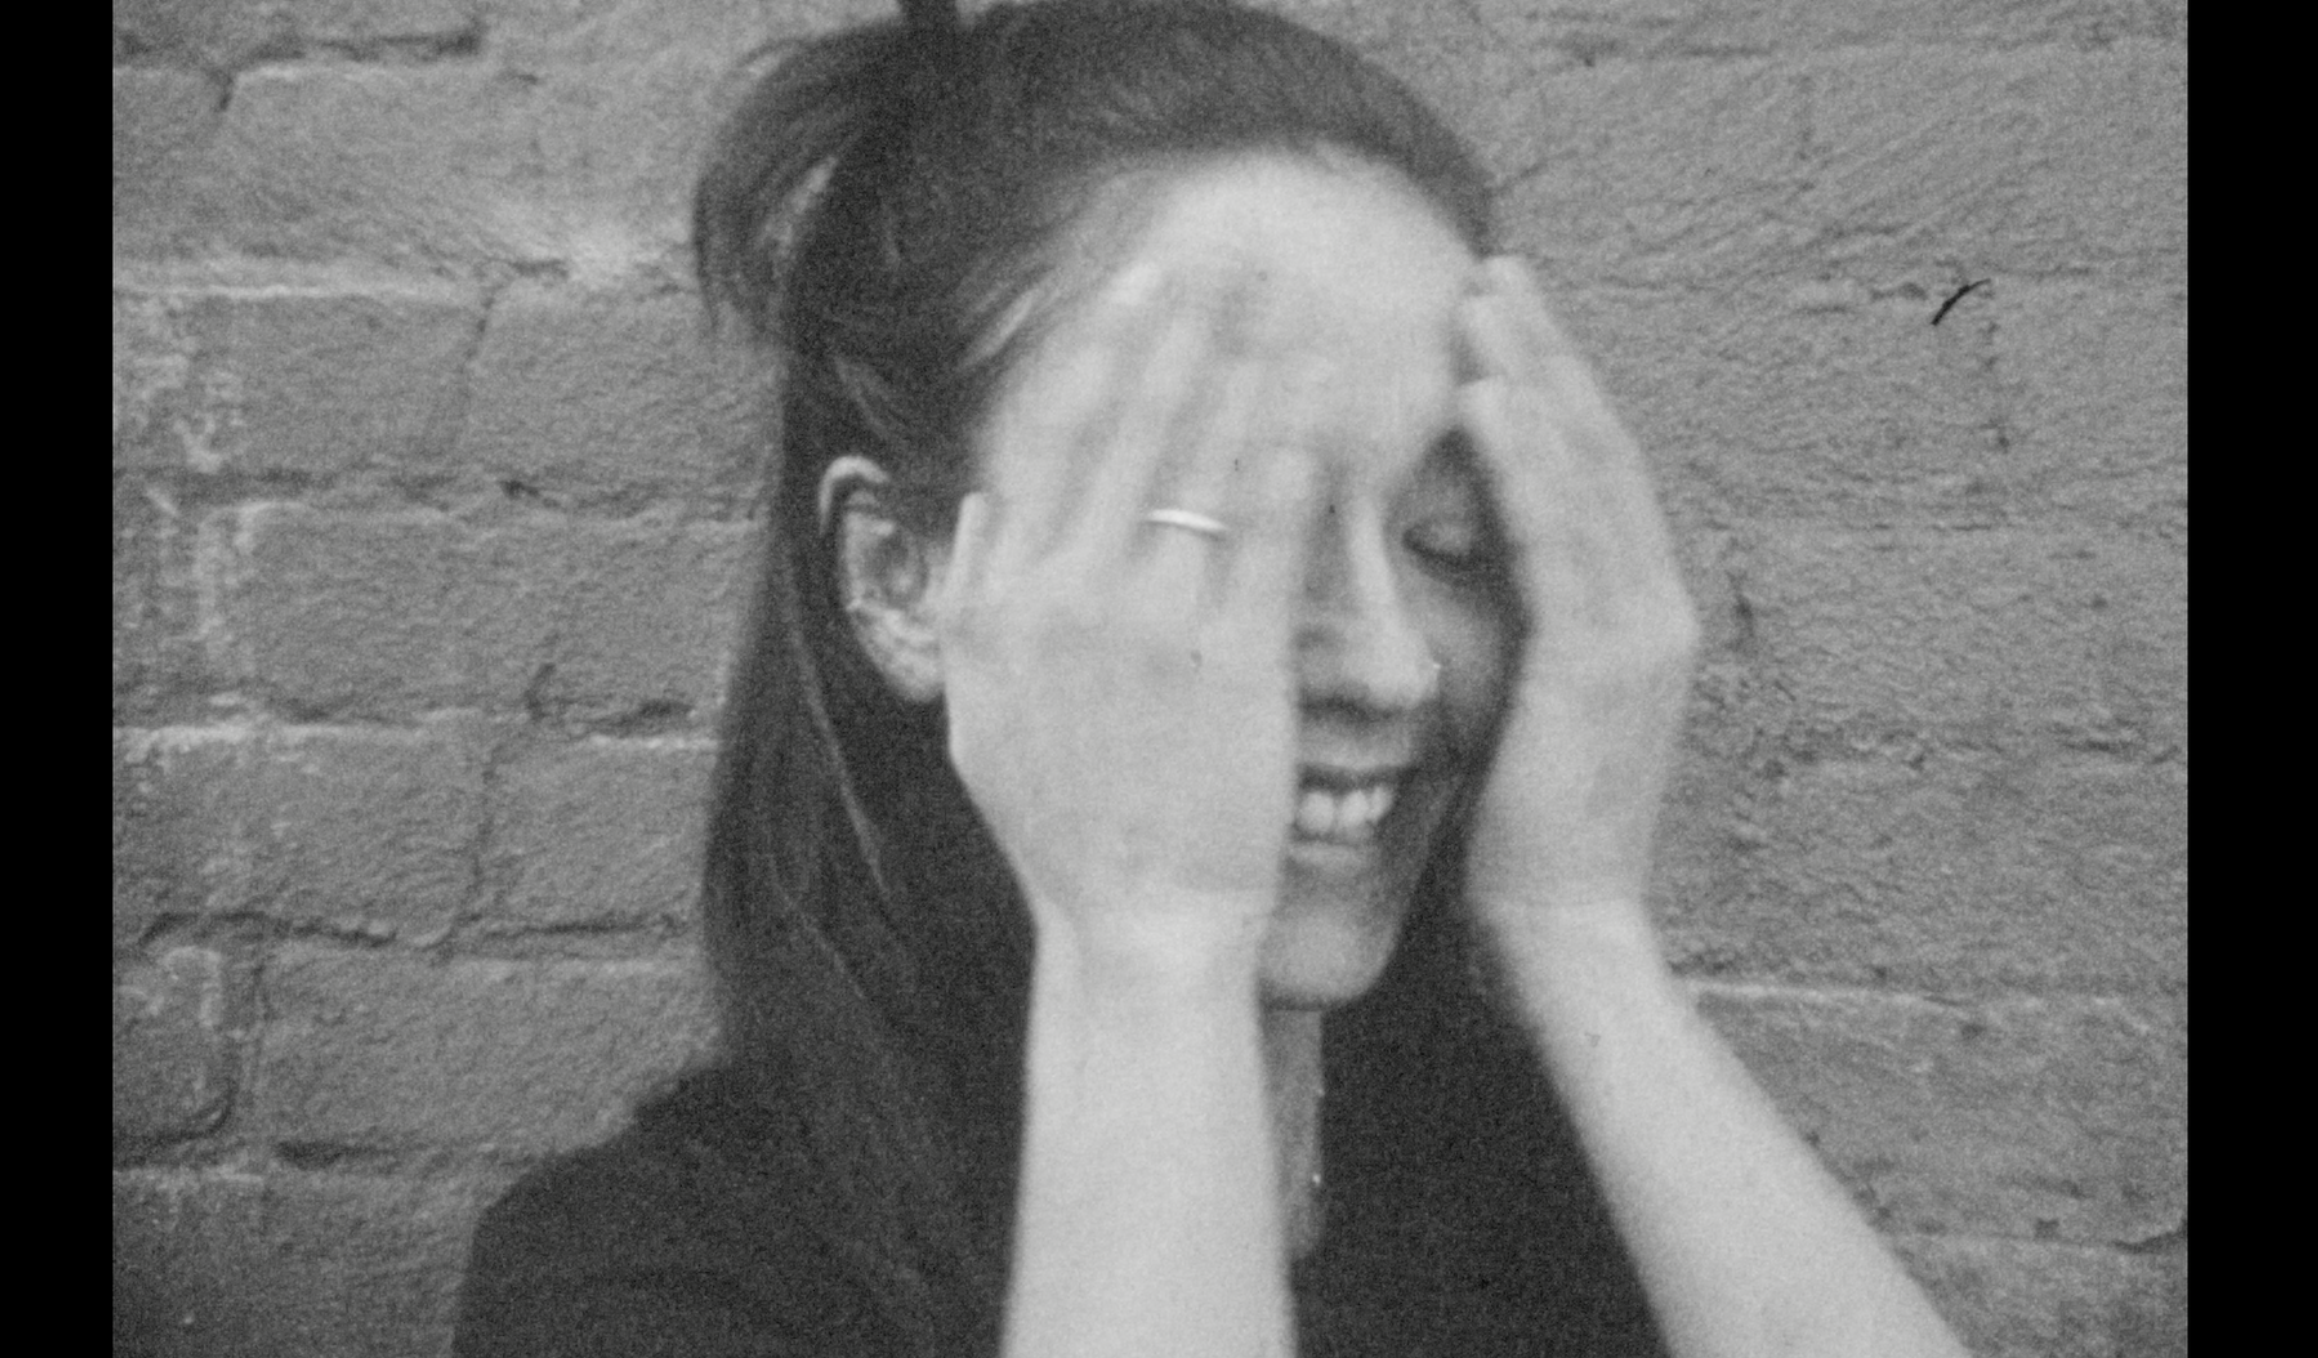 Portrait of Lucia in black and white. Lucia is looking to her left, smiling, and cover her face with her hands